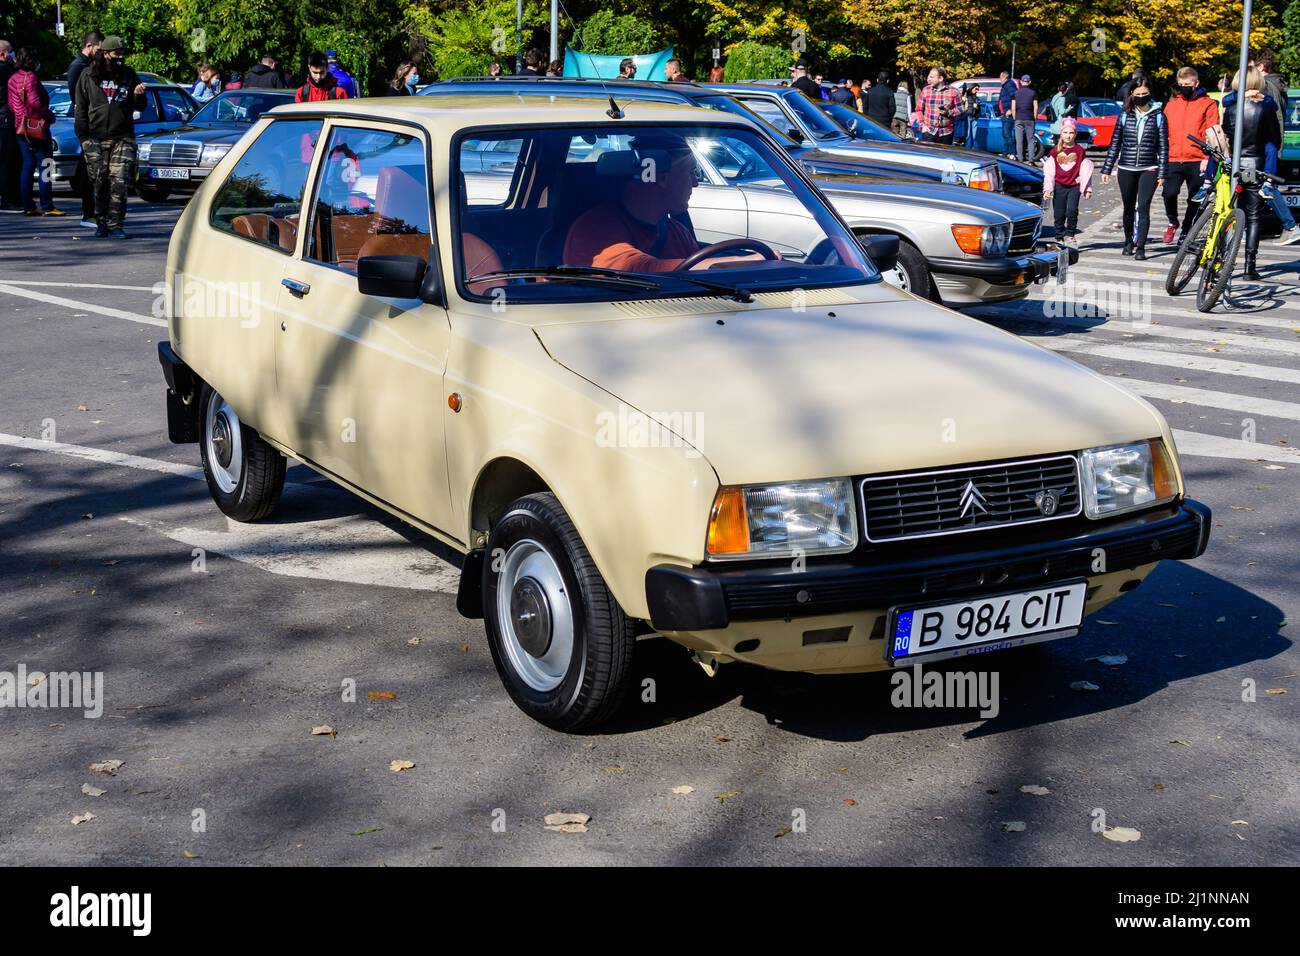 Bucharest, Romania, 24 October 2021: One vivid yellow Citroen French vintage car in traffic in a street at an event for vintage cars collections, in a Stock Photo